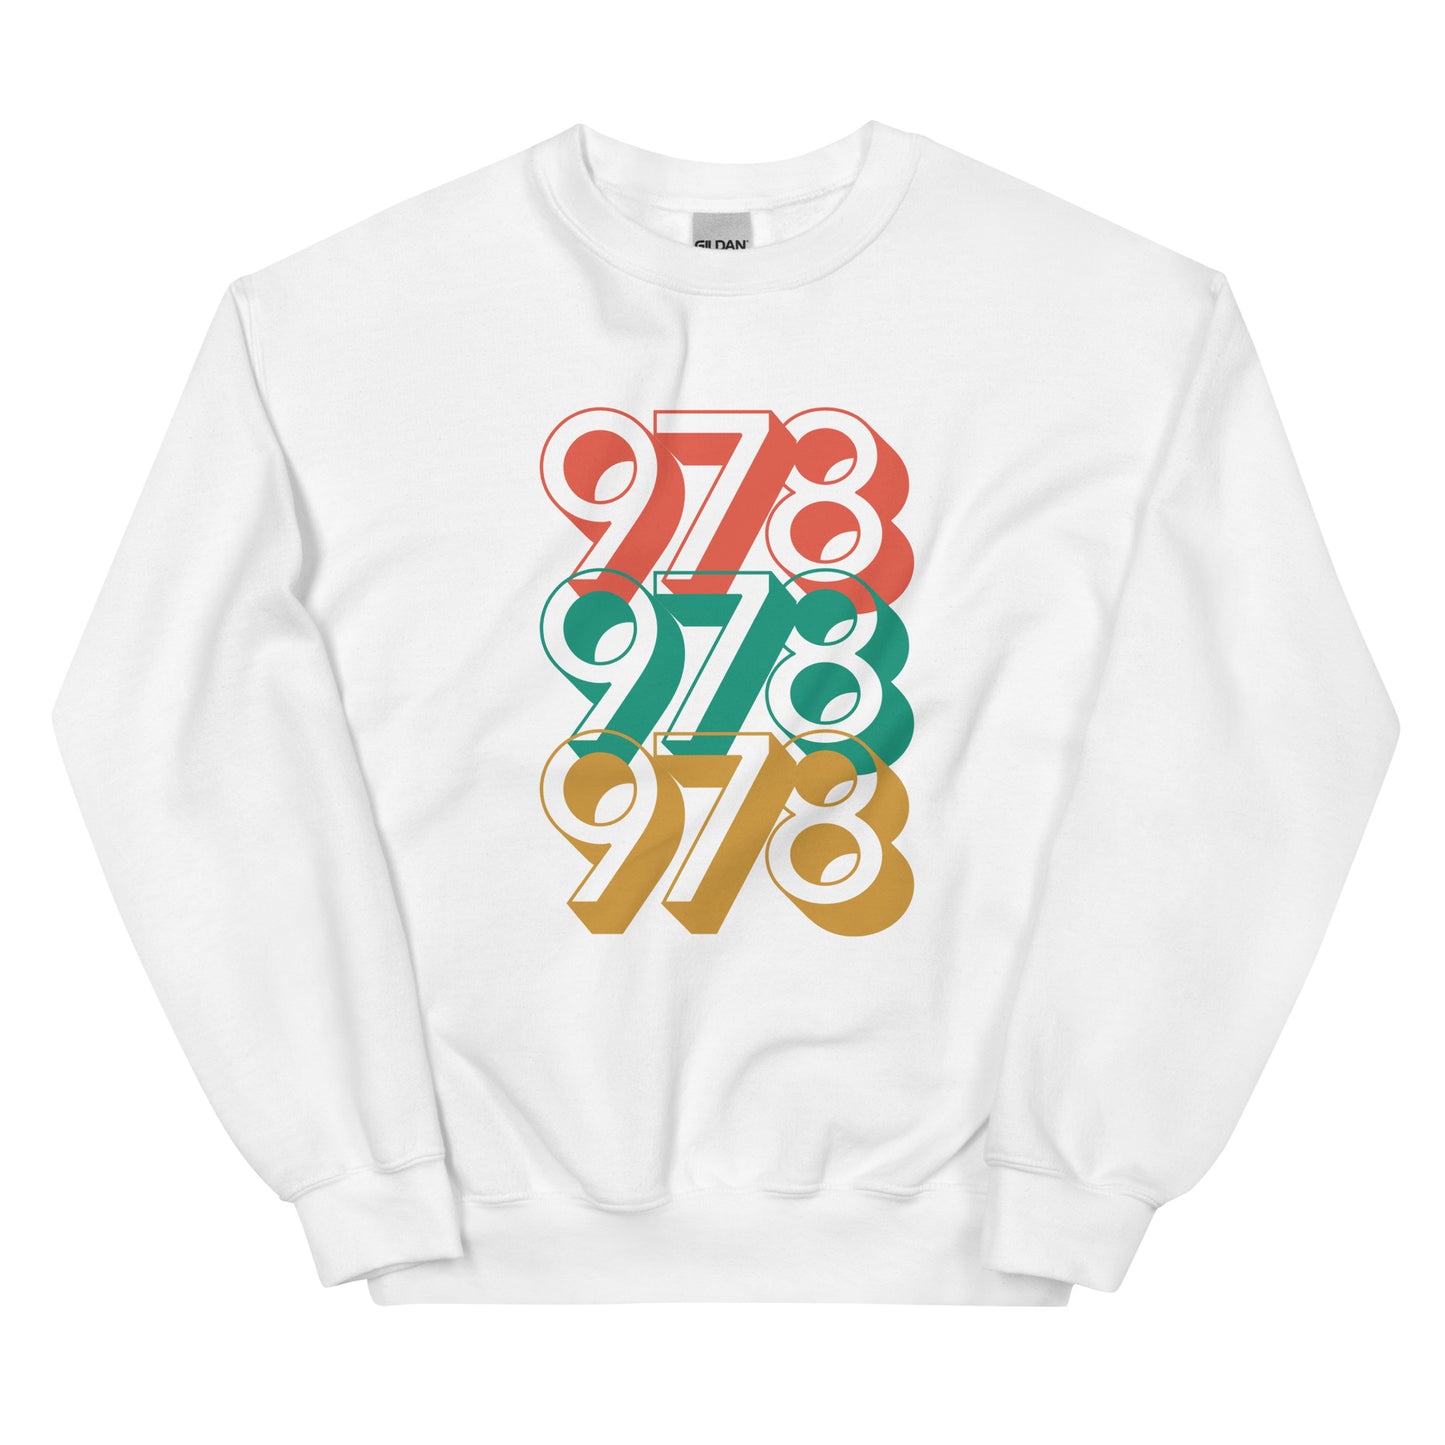 white crewneck with three 978s in red green and yellow